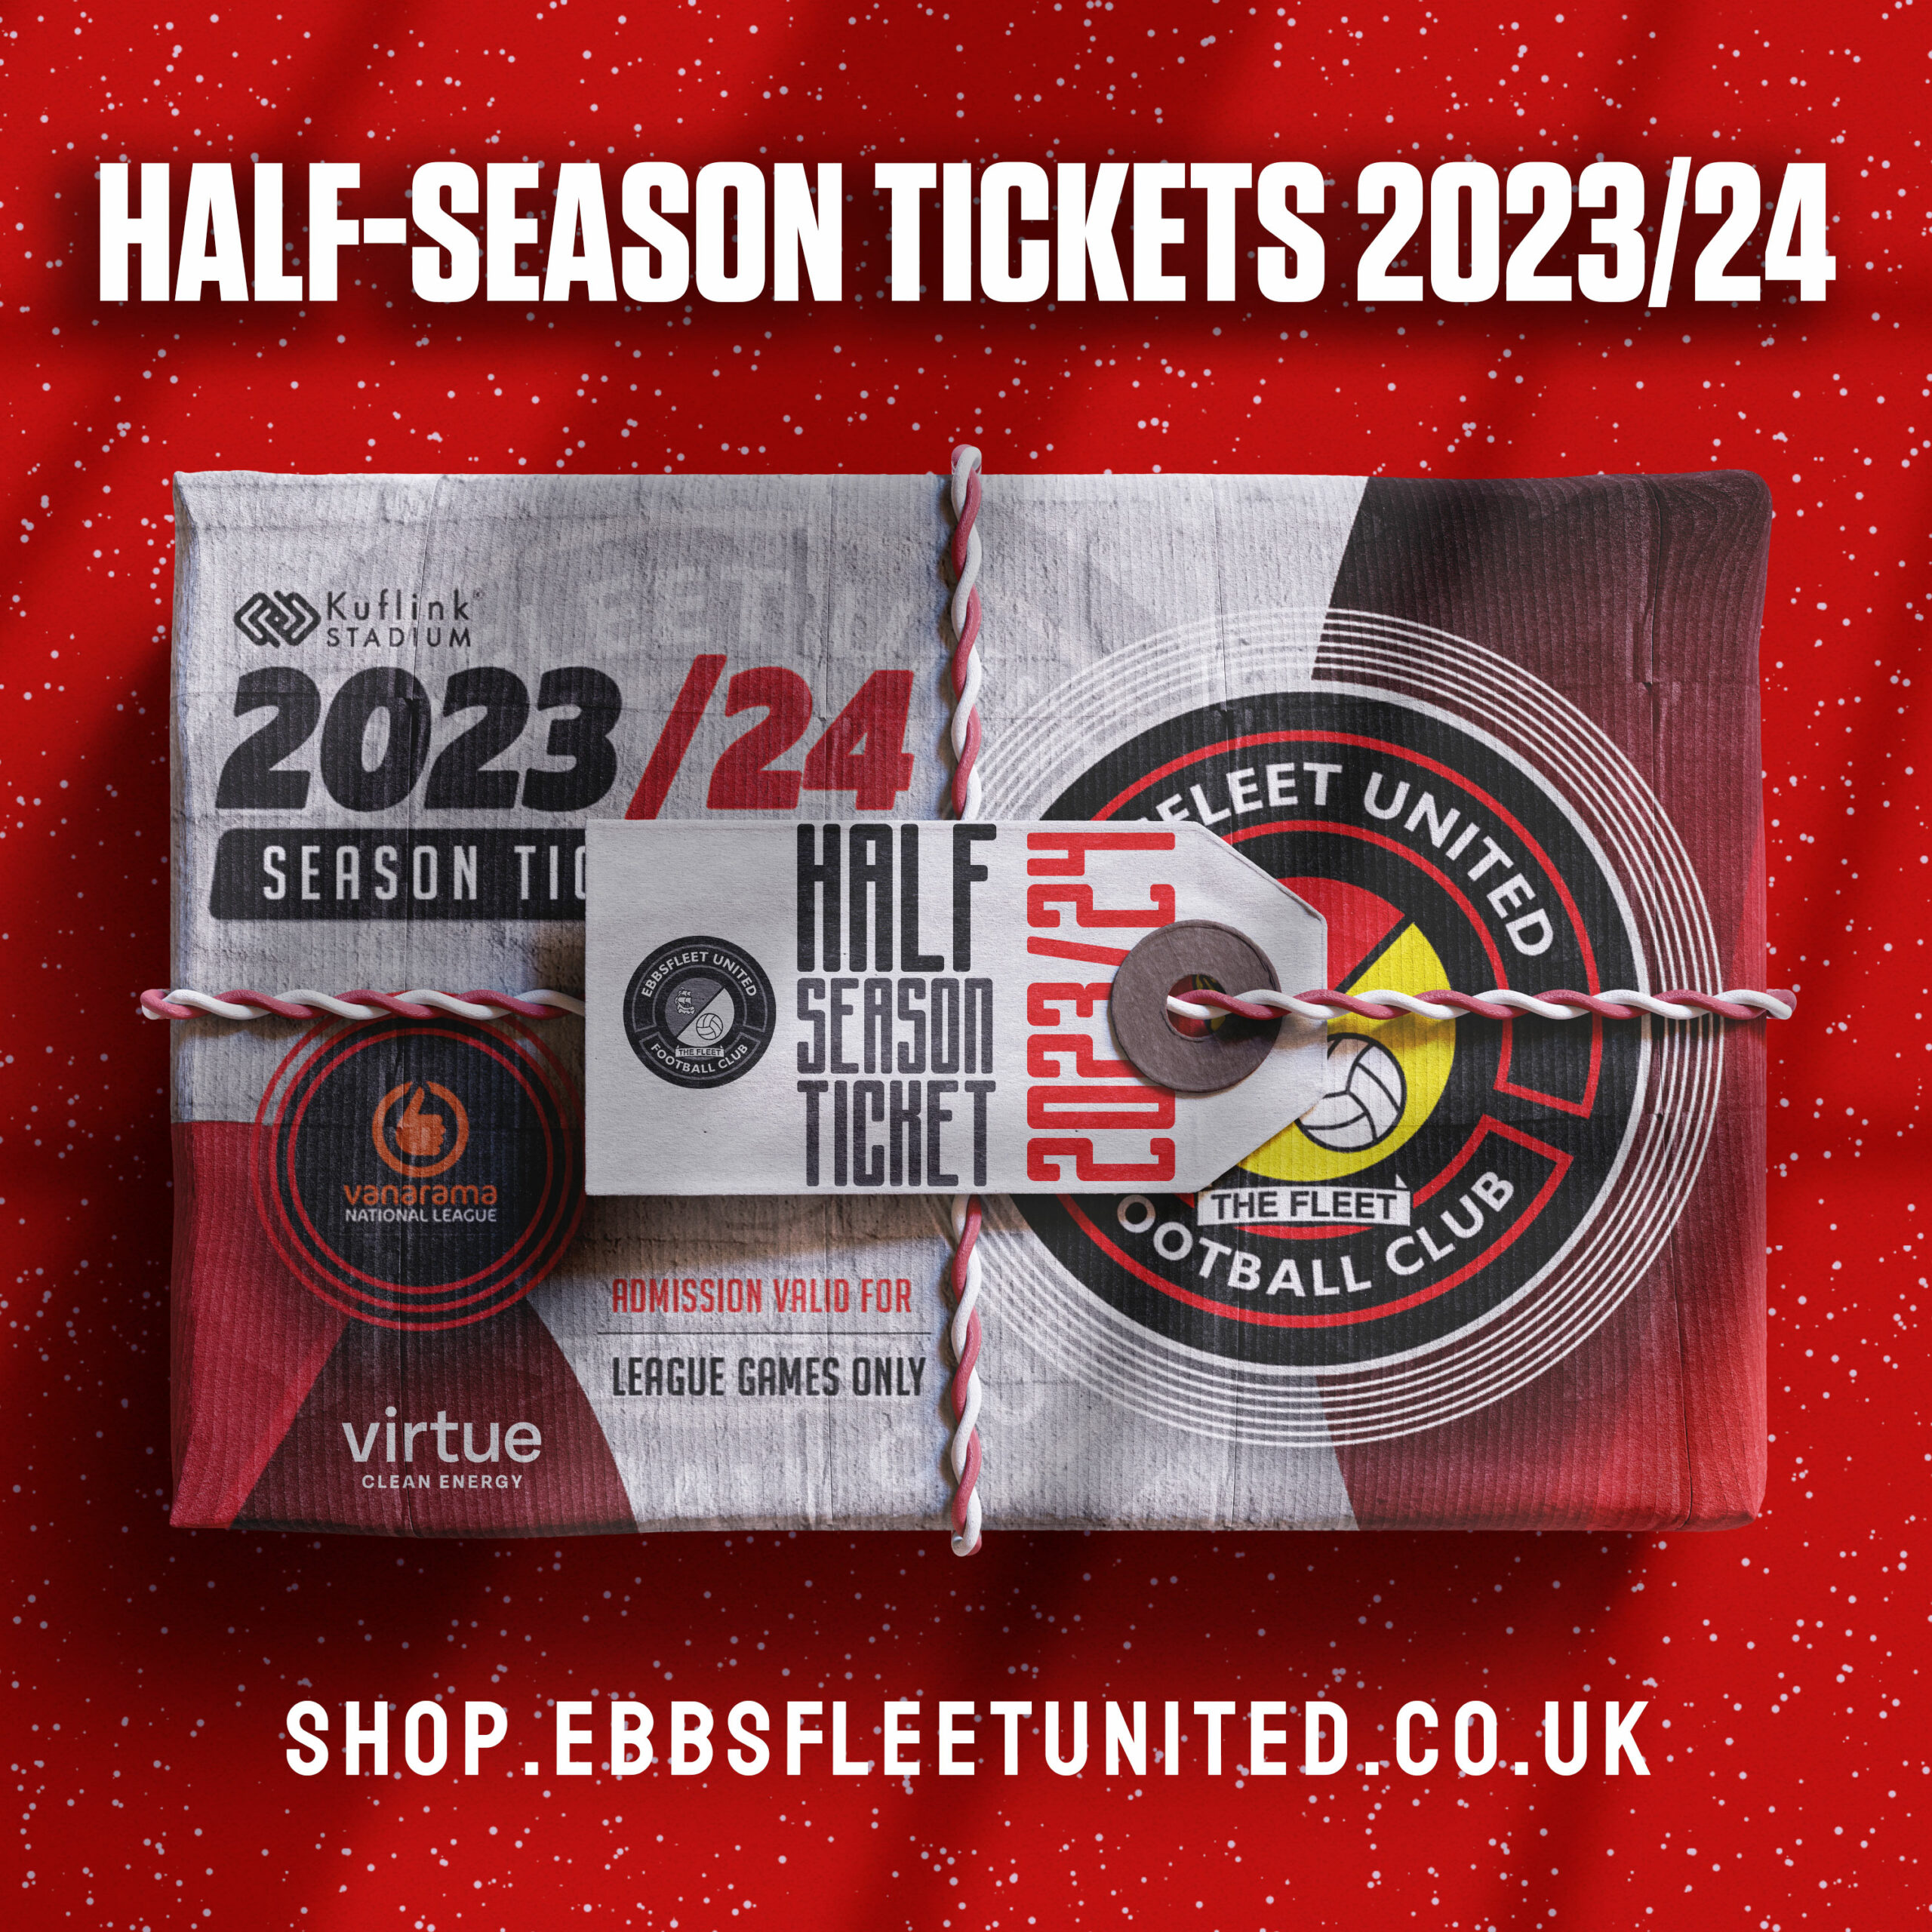 Ebbsfleet United season ticket for 2023/24 season priced at £250 for adults  regardless of their division